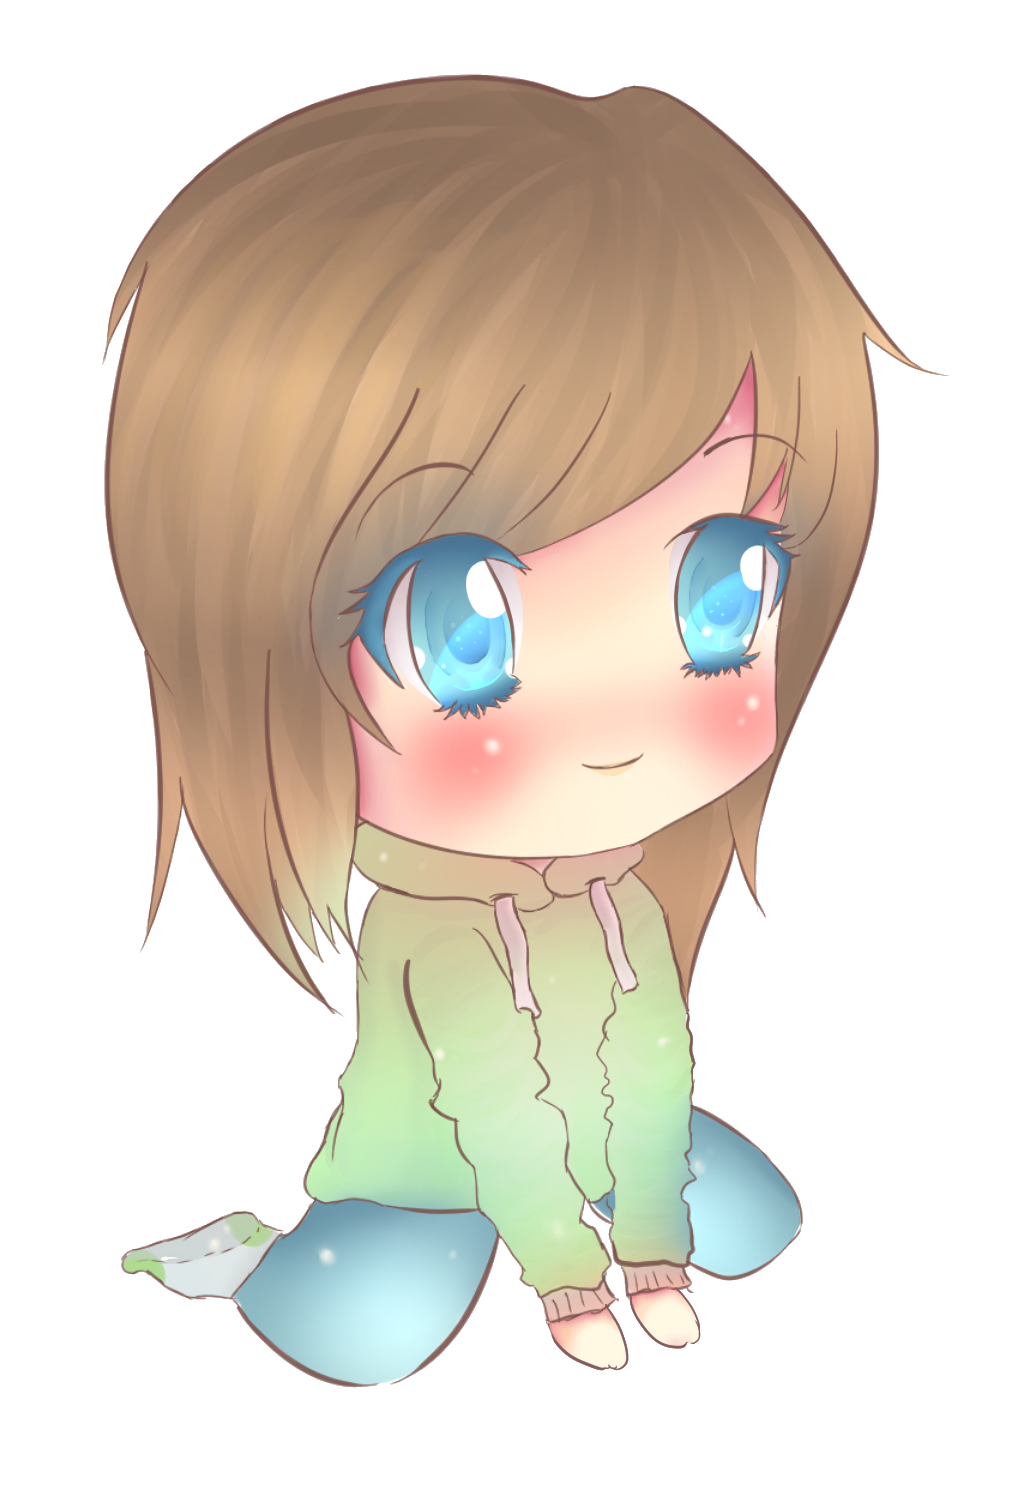 Cute chibi girl by Krinah on Clipart library